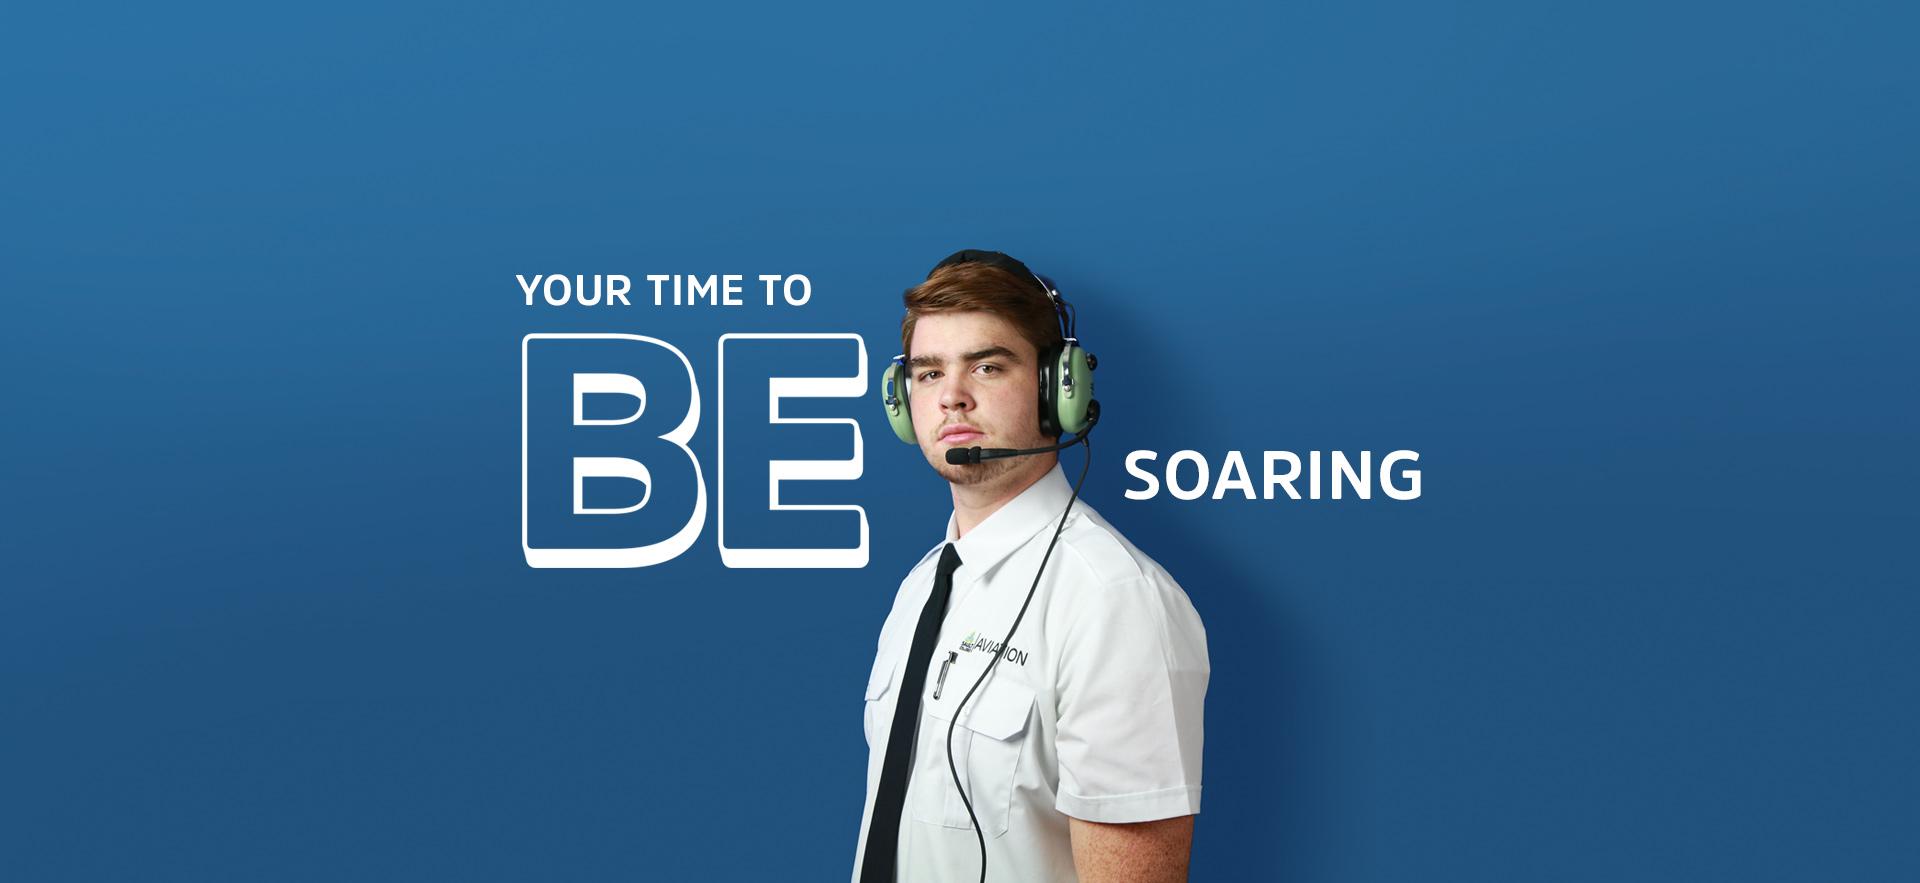 Aviation student in uniform and with headset looking at camera with text overlay YOUR TIME TO BE SOARING